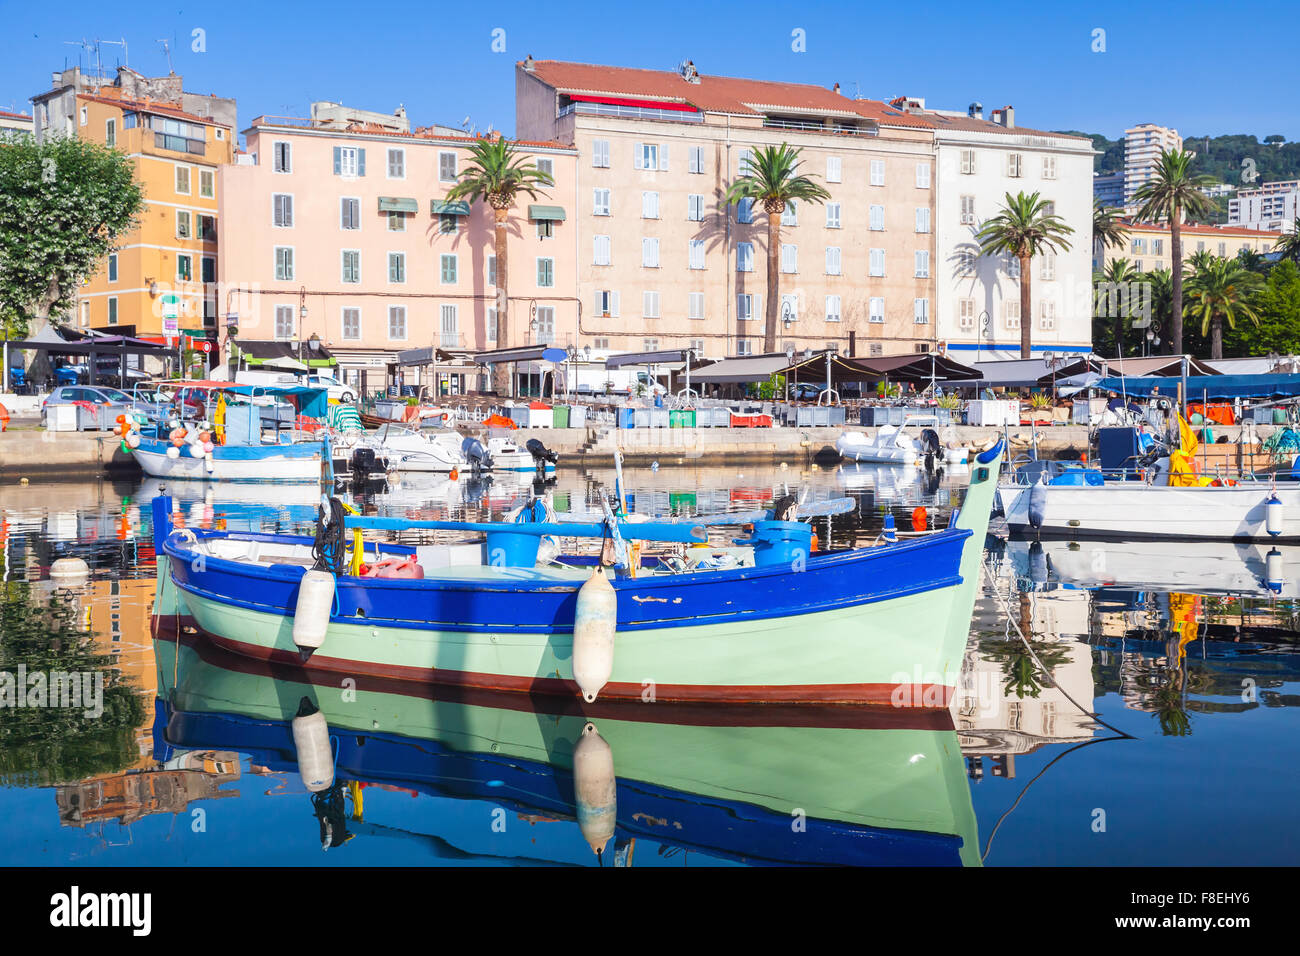 Small colorful wooden fishing boat moored in old port of Ajaccio, Corsica, France Stock Photo